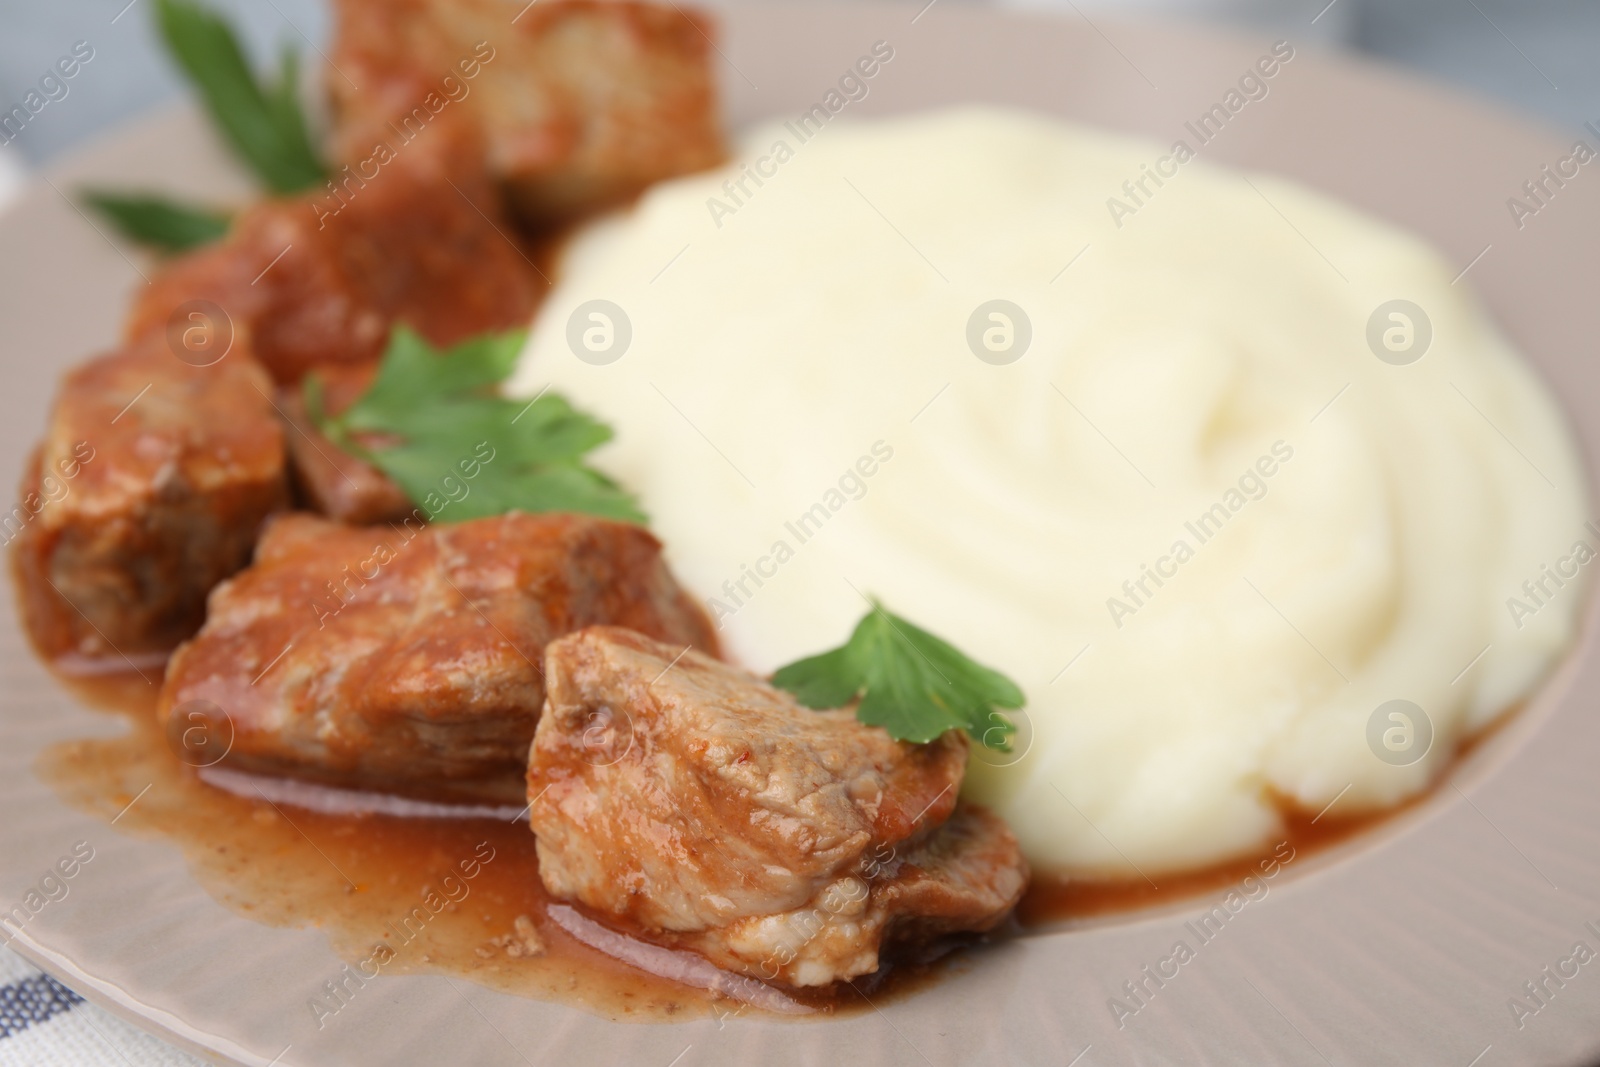 Photo of Delicious goulash and mashed potato on plate, closeup